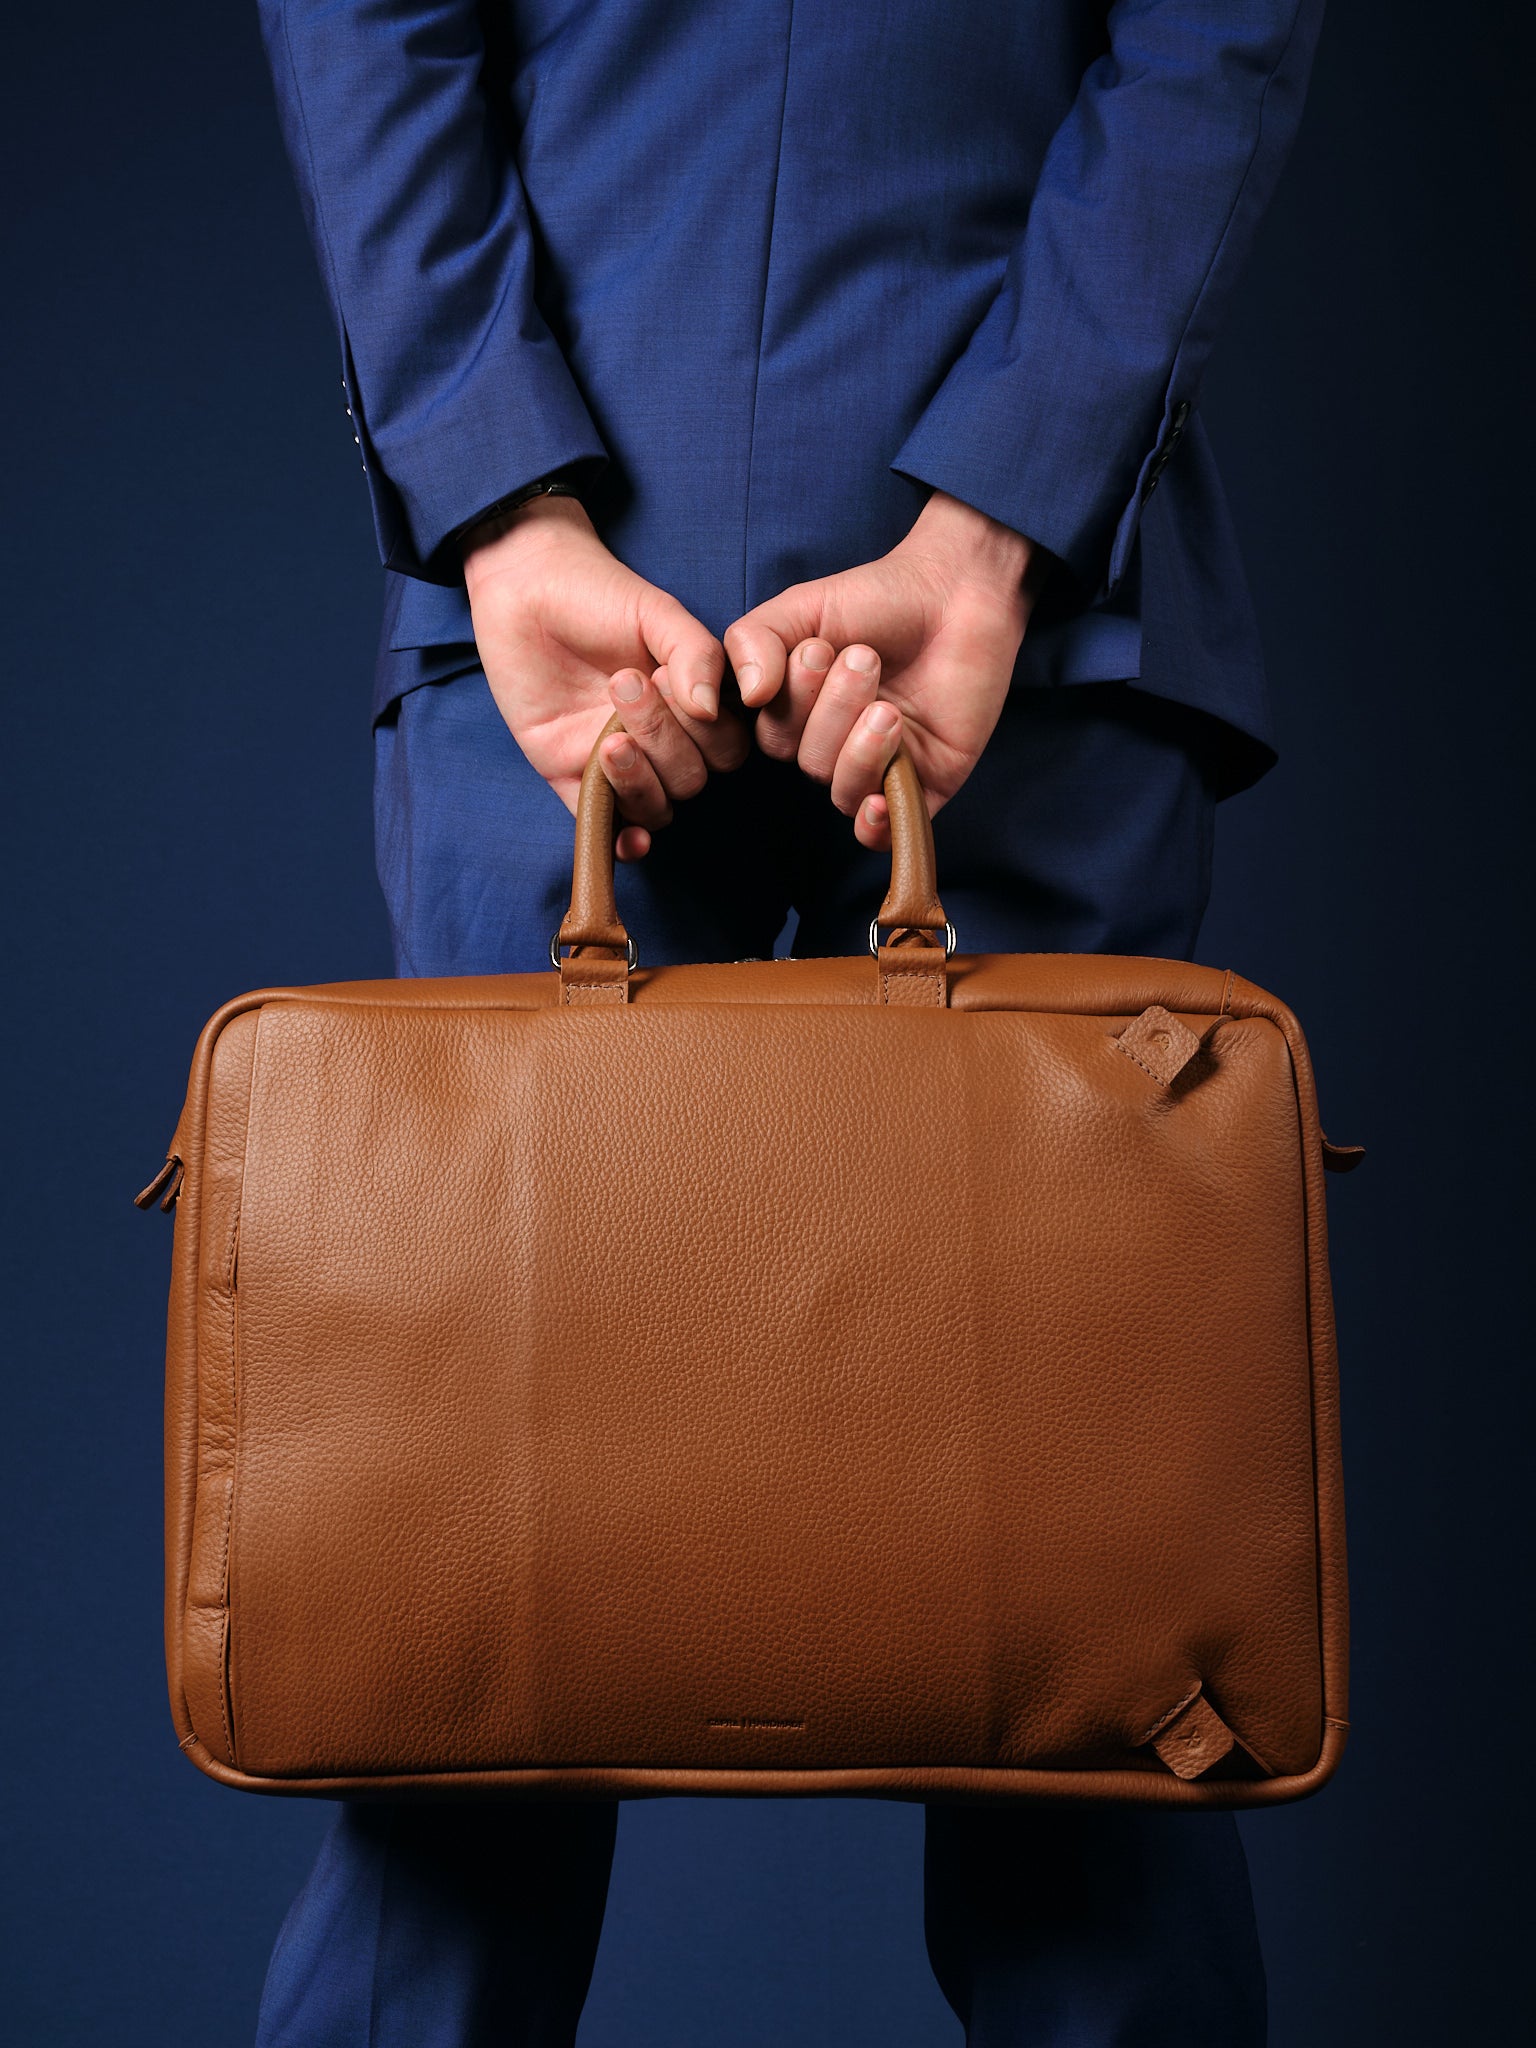 Hybrid Backpack Briefcase. Leather Briefcase for Men Tan by Capra